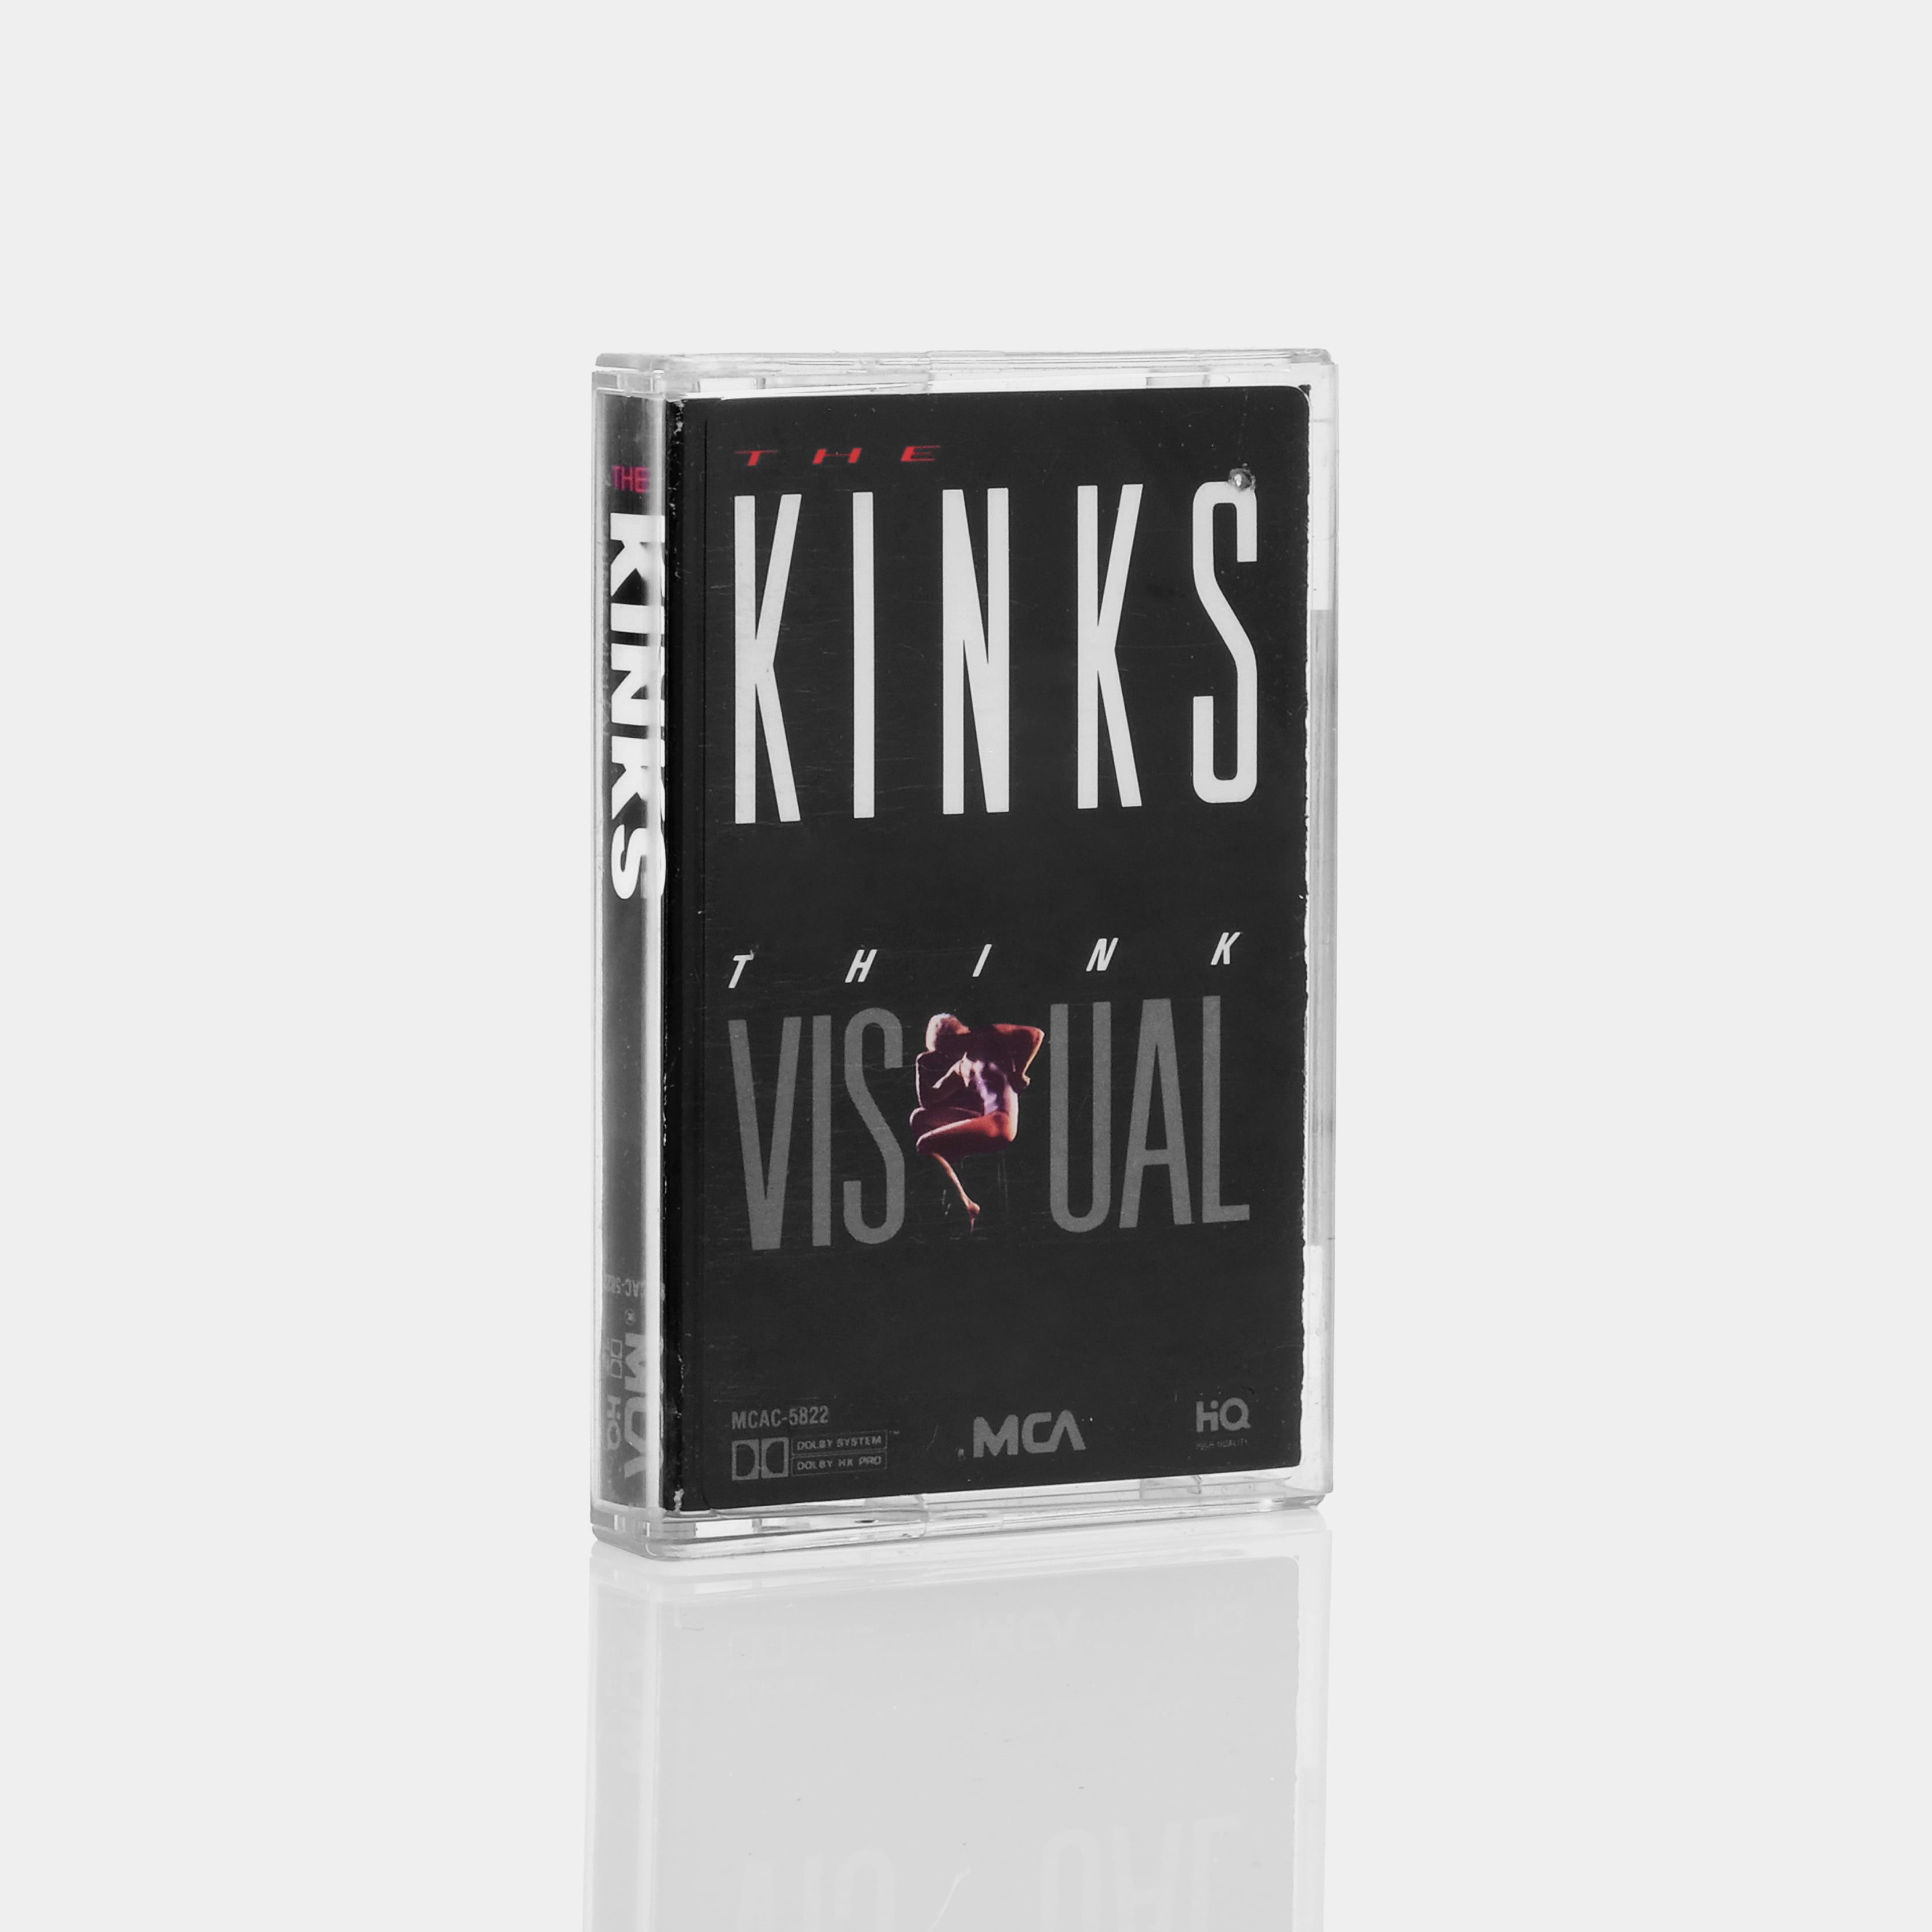 The Kinks - Think Visual Cassette Tape